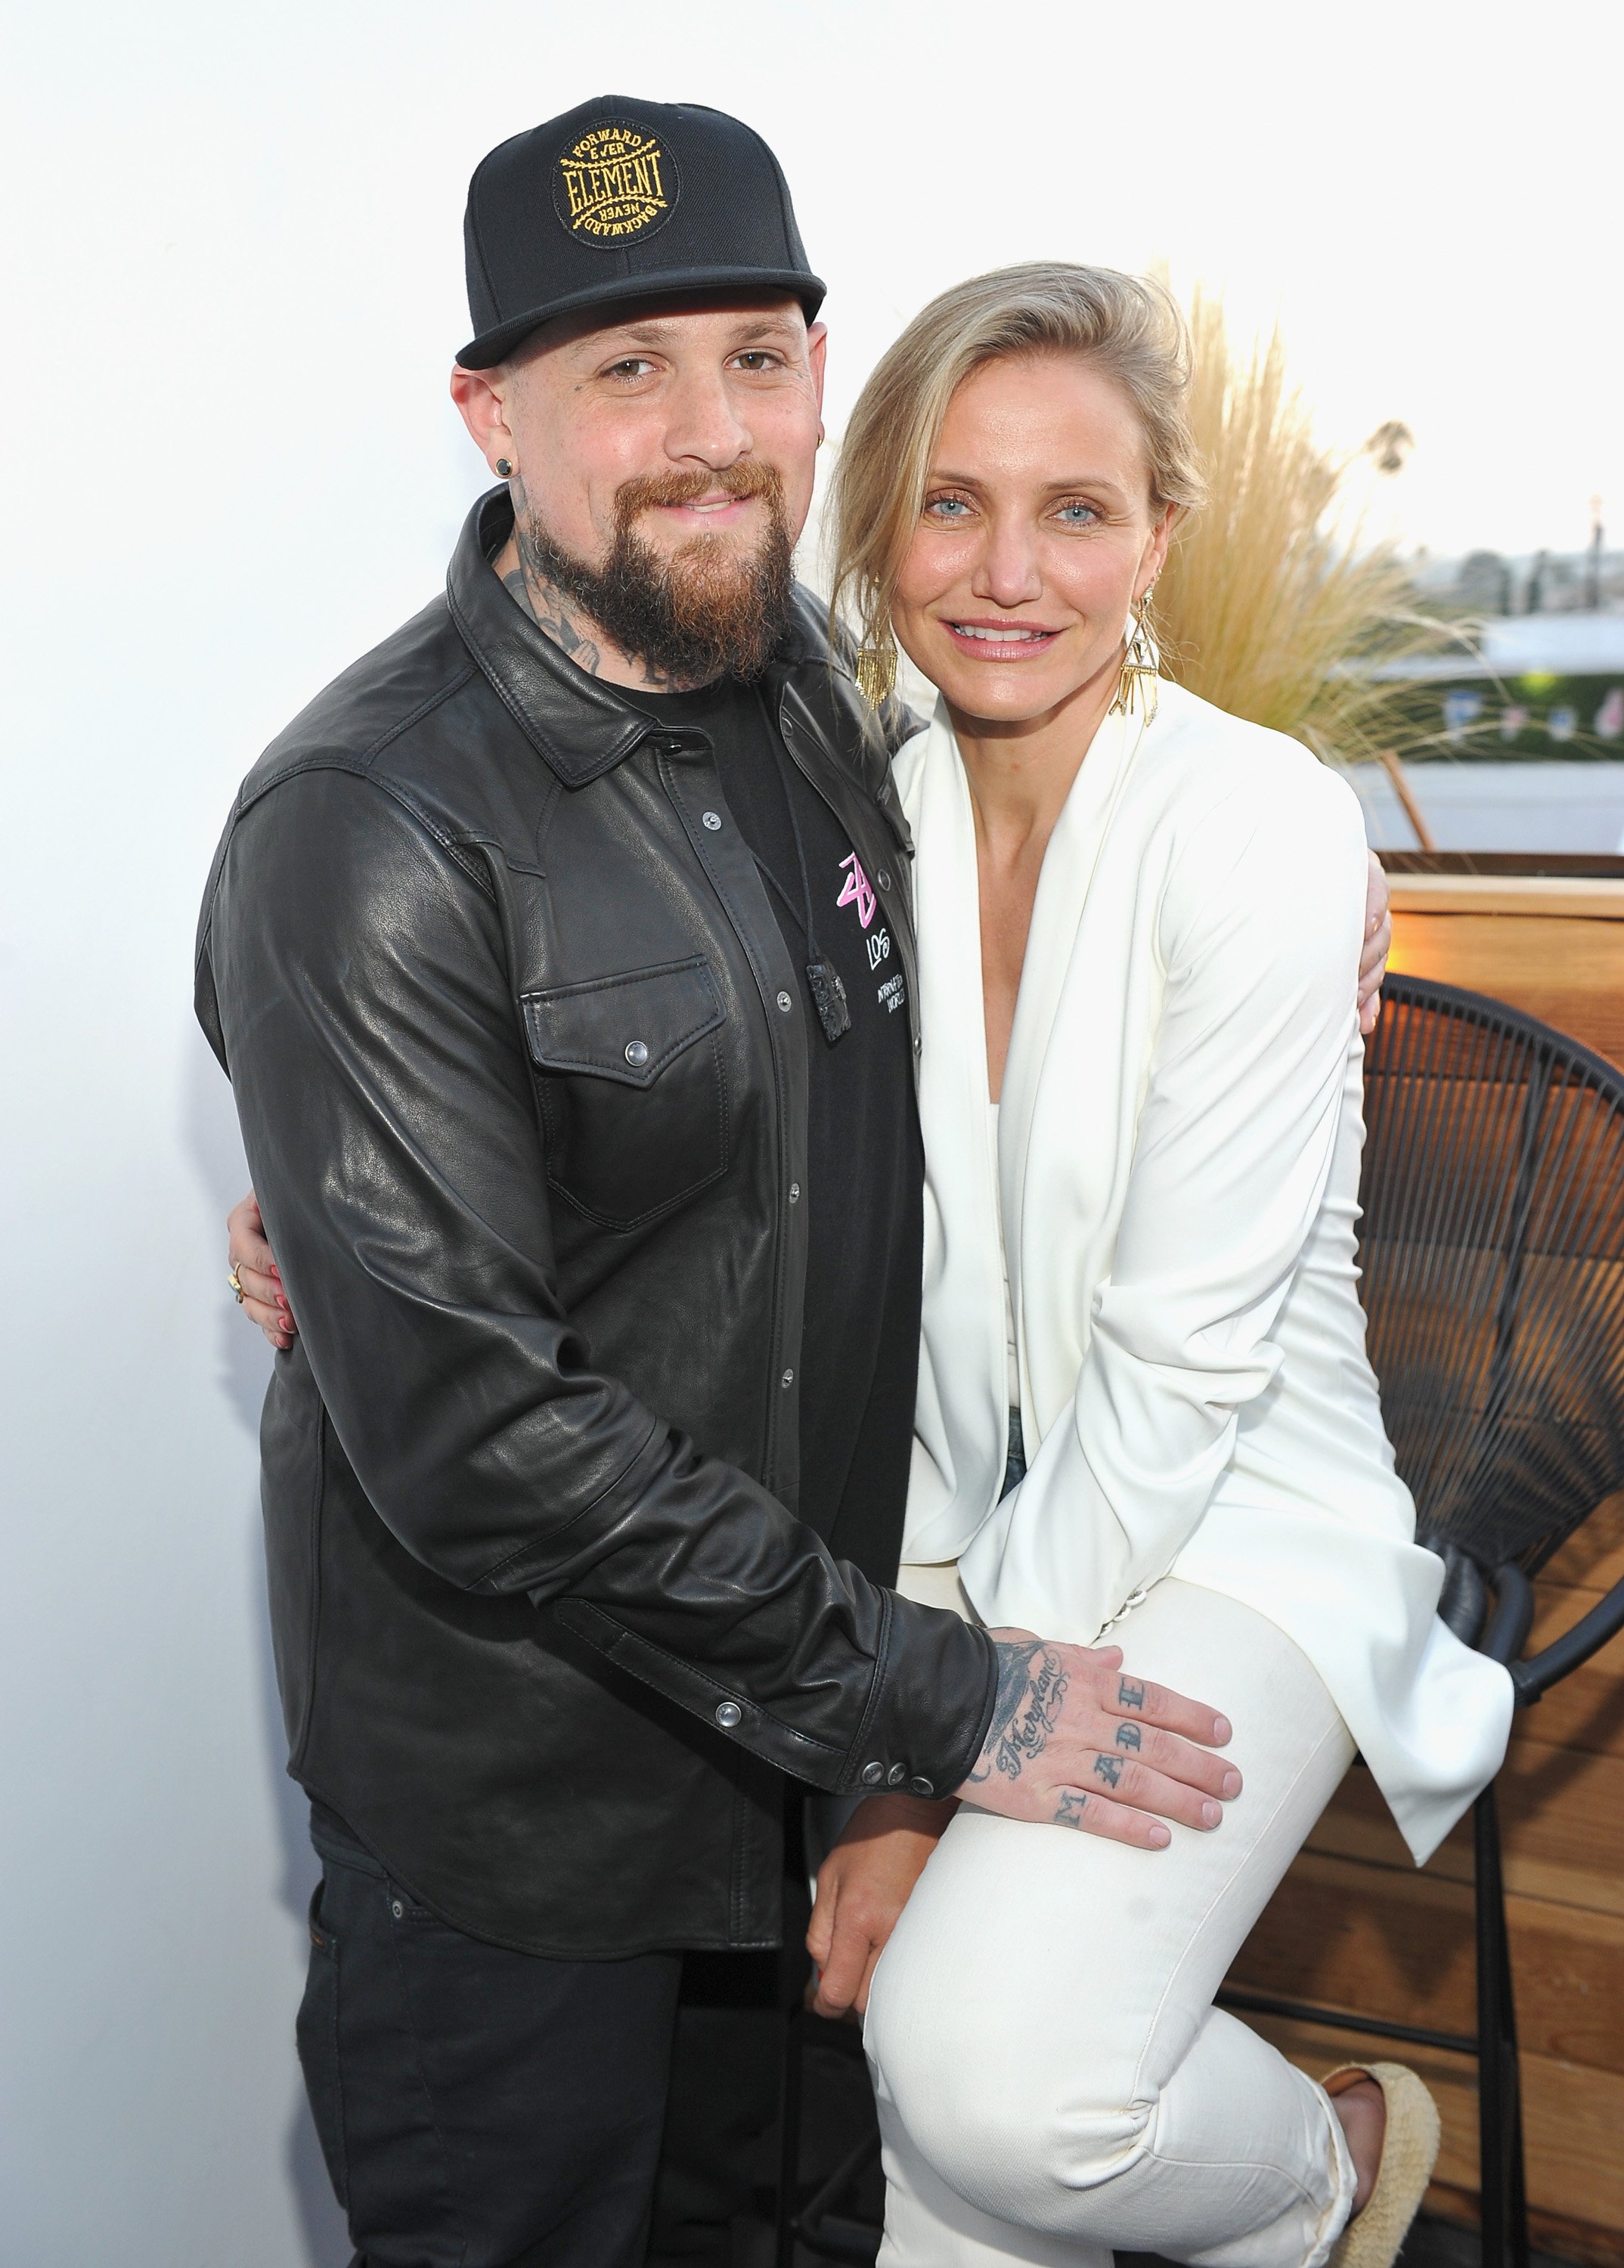 Guitarist Benji Madden and actress Cameron Diaz attend House of Harlow 1960 x REVOLVE. June 2, 2016 in Los Angeles, California. | Source: Getty Images